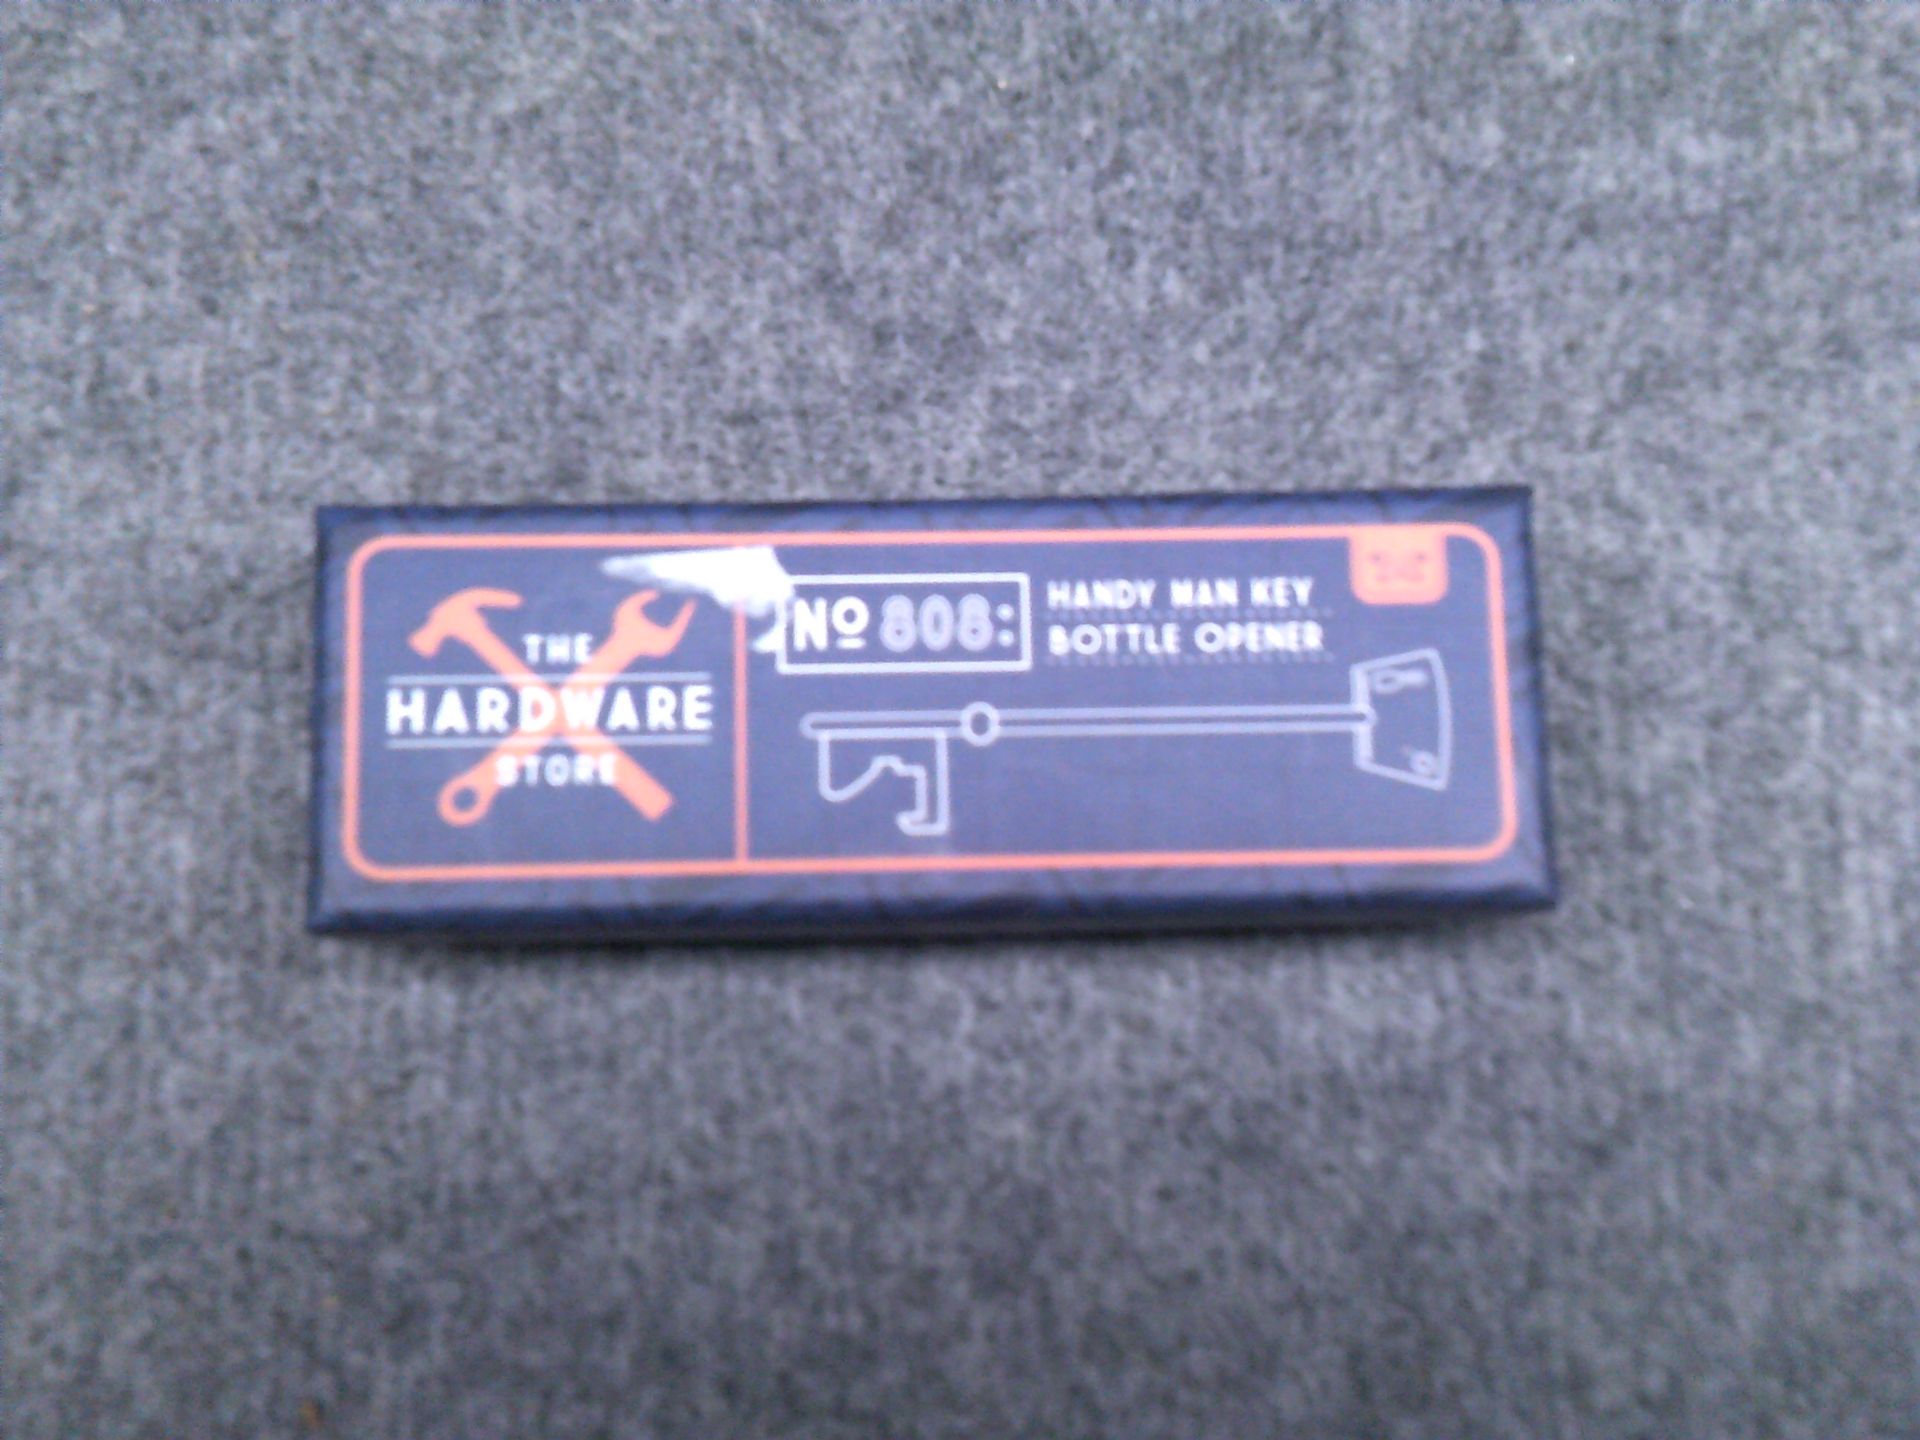 The hardware store no 808 handy man key bottle opener (Delivery Band A)